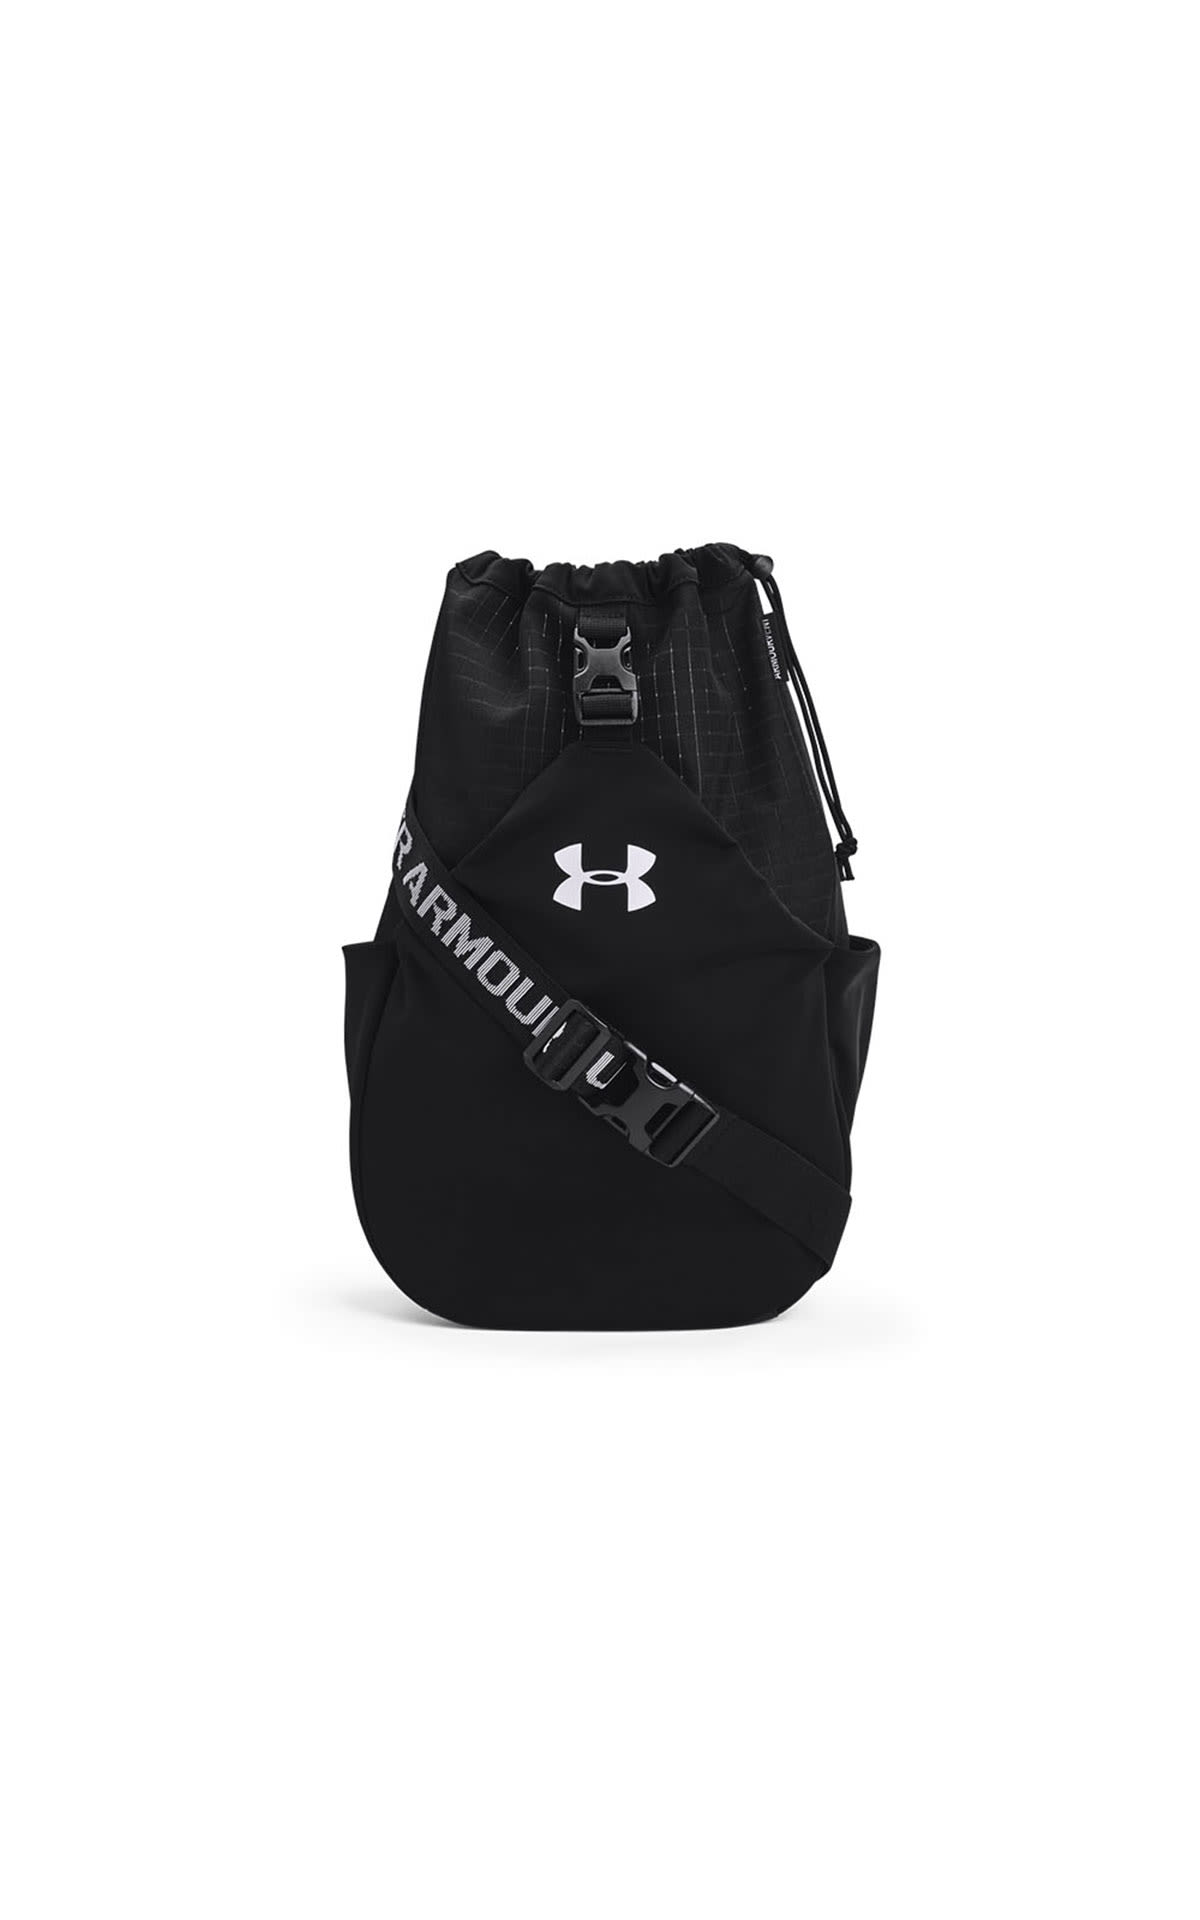 Under Armour Favourite backpack from Bicester Village